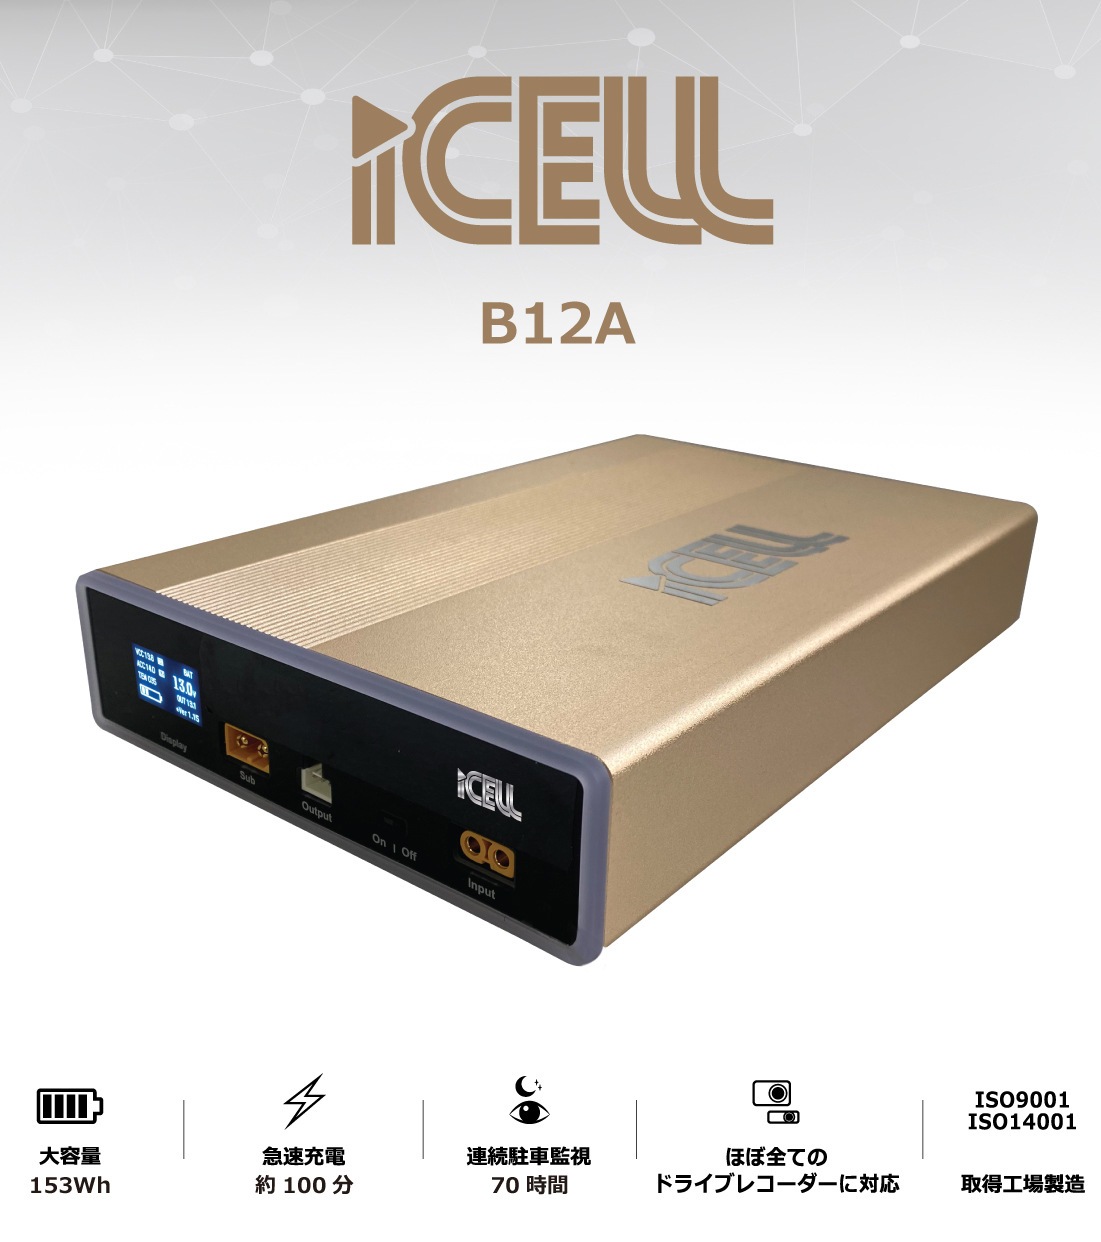 iCELL  B12A